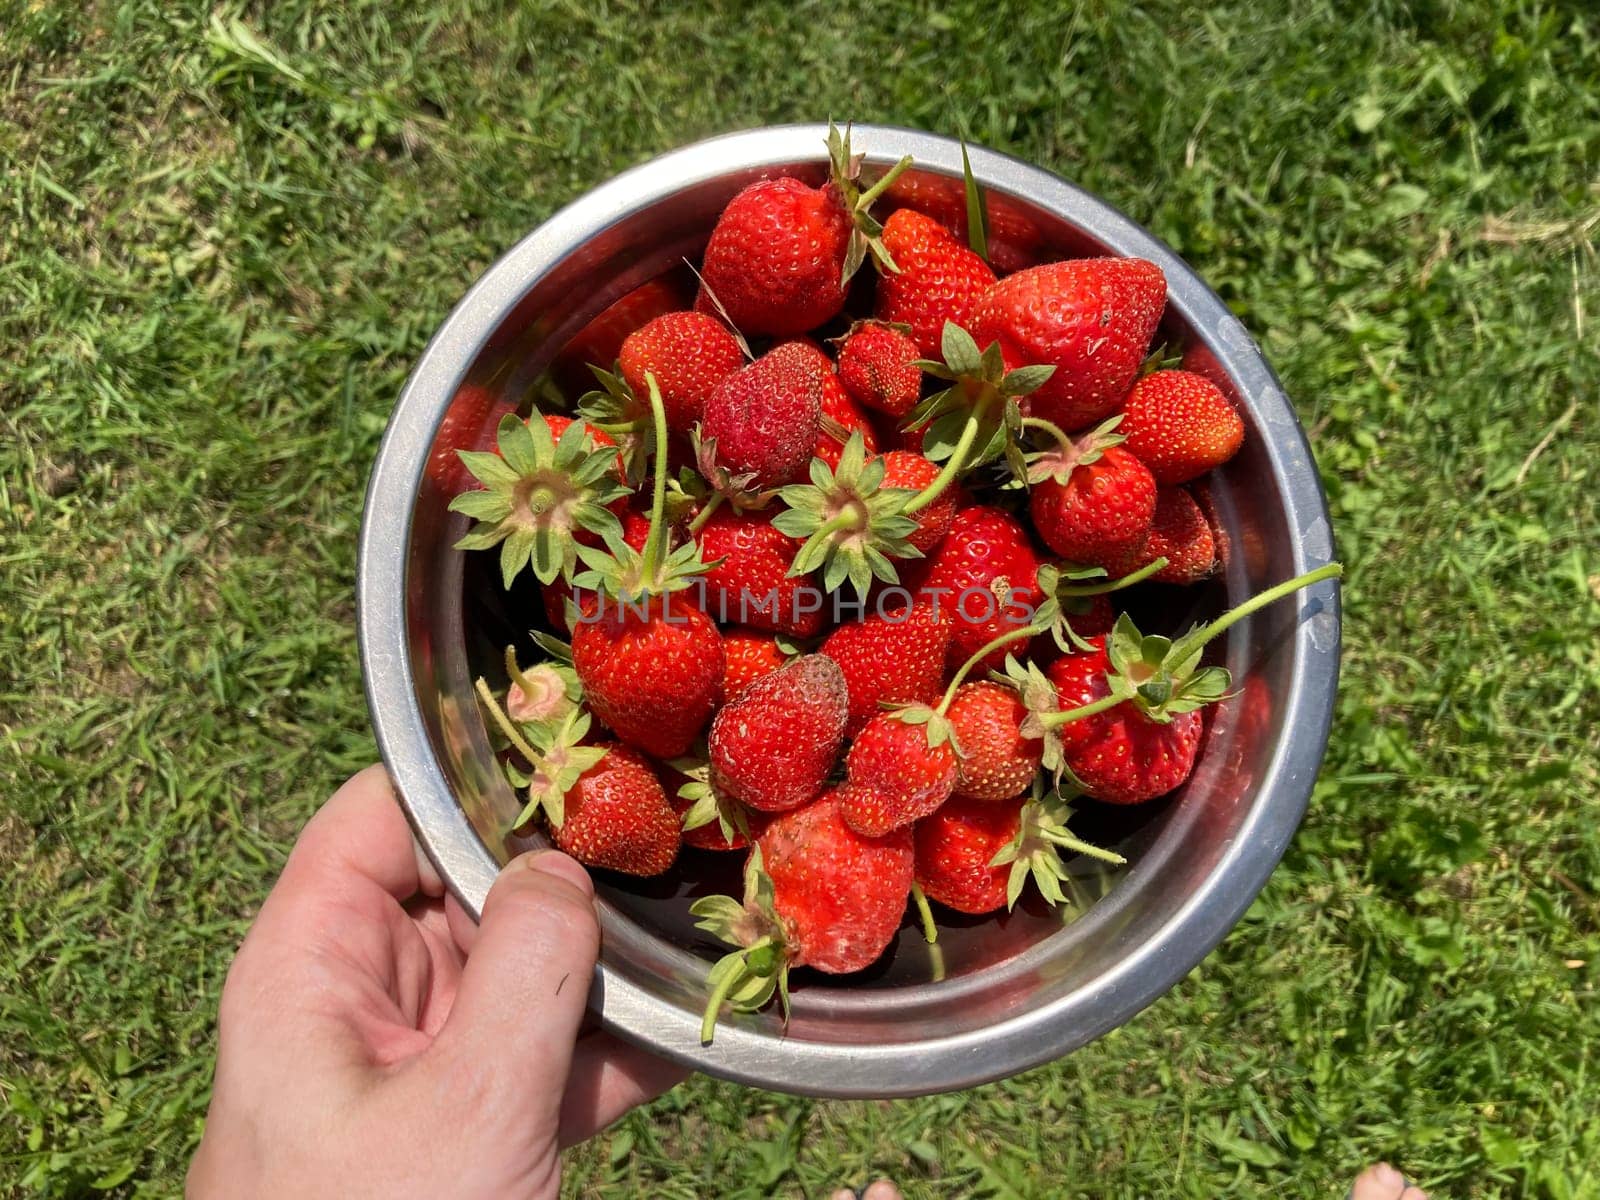 Young large strawberries grew in a the village